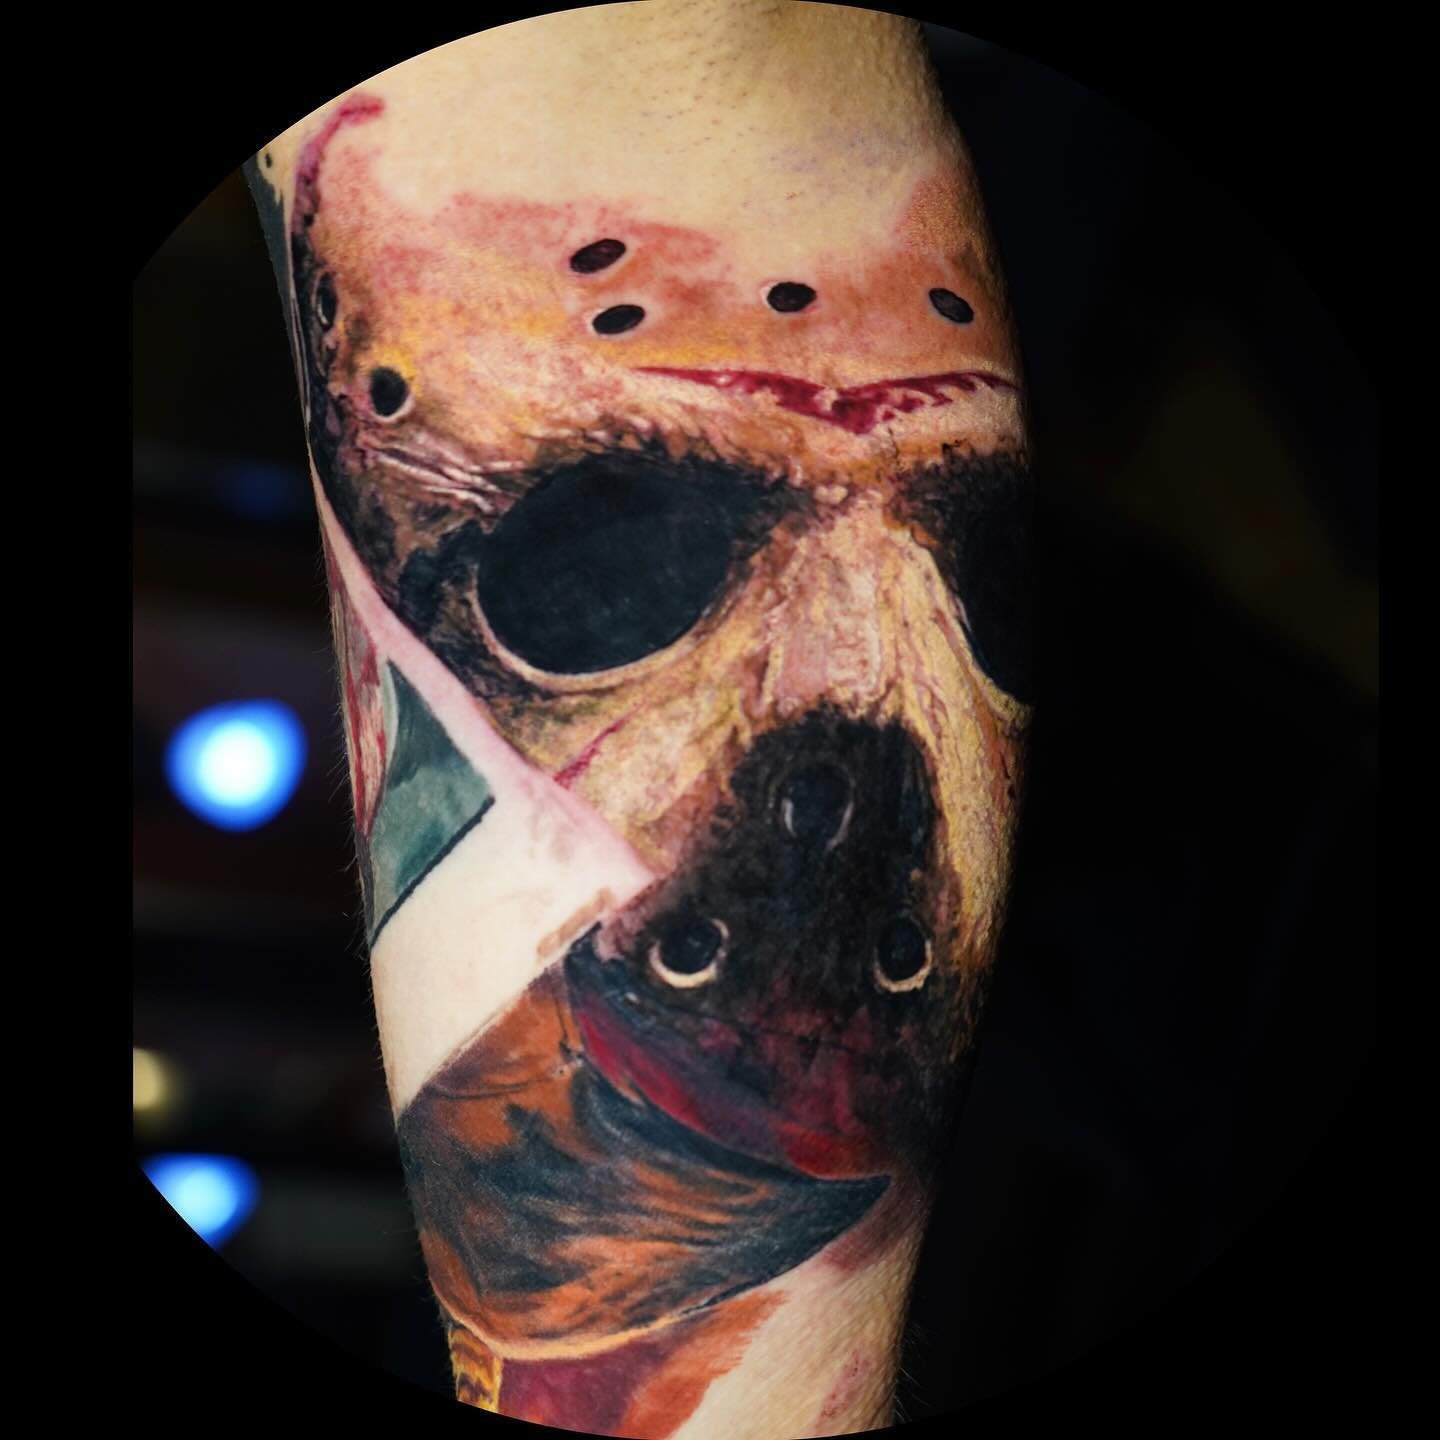 Whos planning a camping trip this summer? I know a spot! Added to @dgcolorado horror themed sleeve. Love how this is coming together . What are your thoughts? #artesobscurae #realgone #realgonedenver #customtattoo #largescale #trashpolka #largescalet